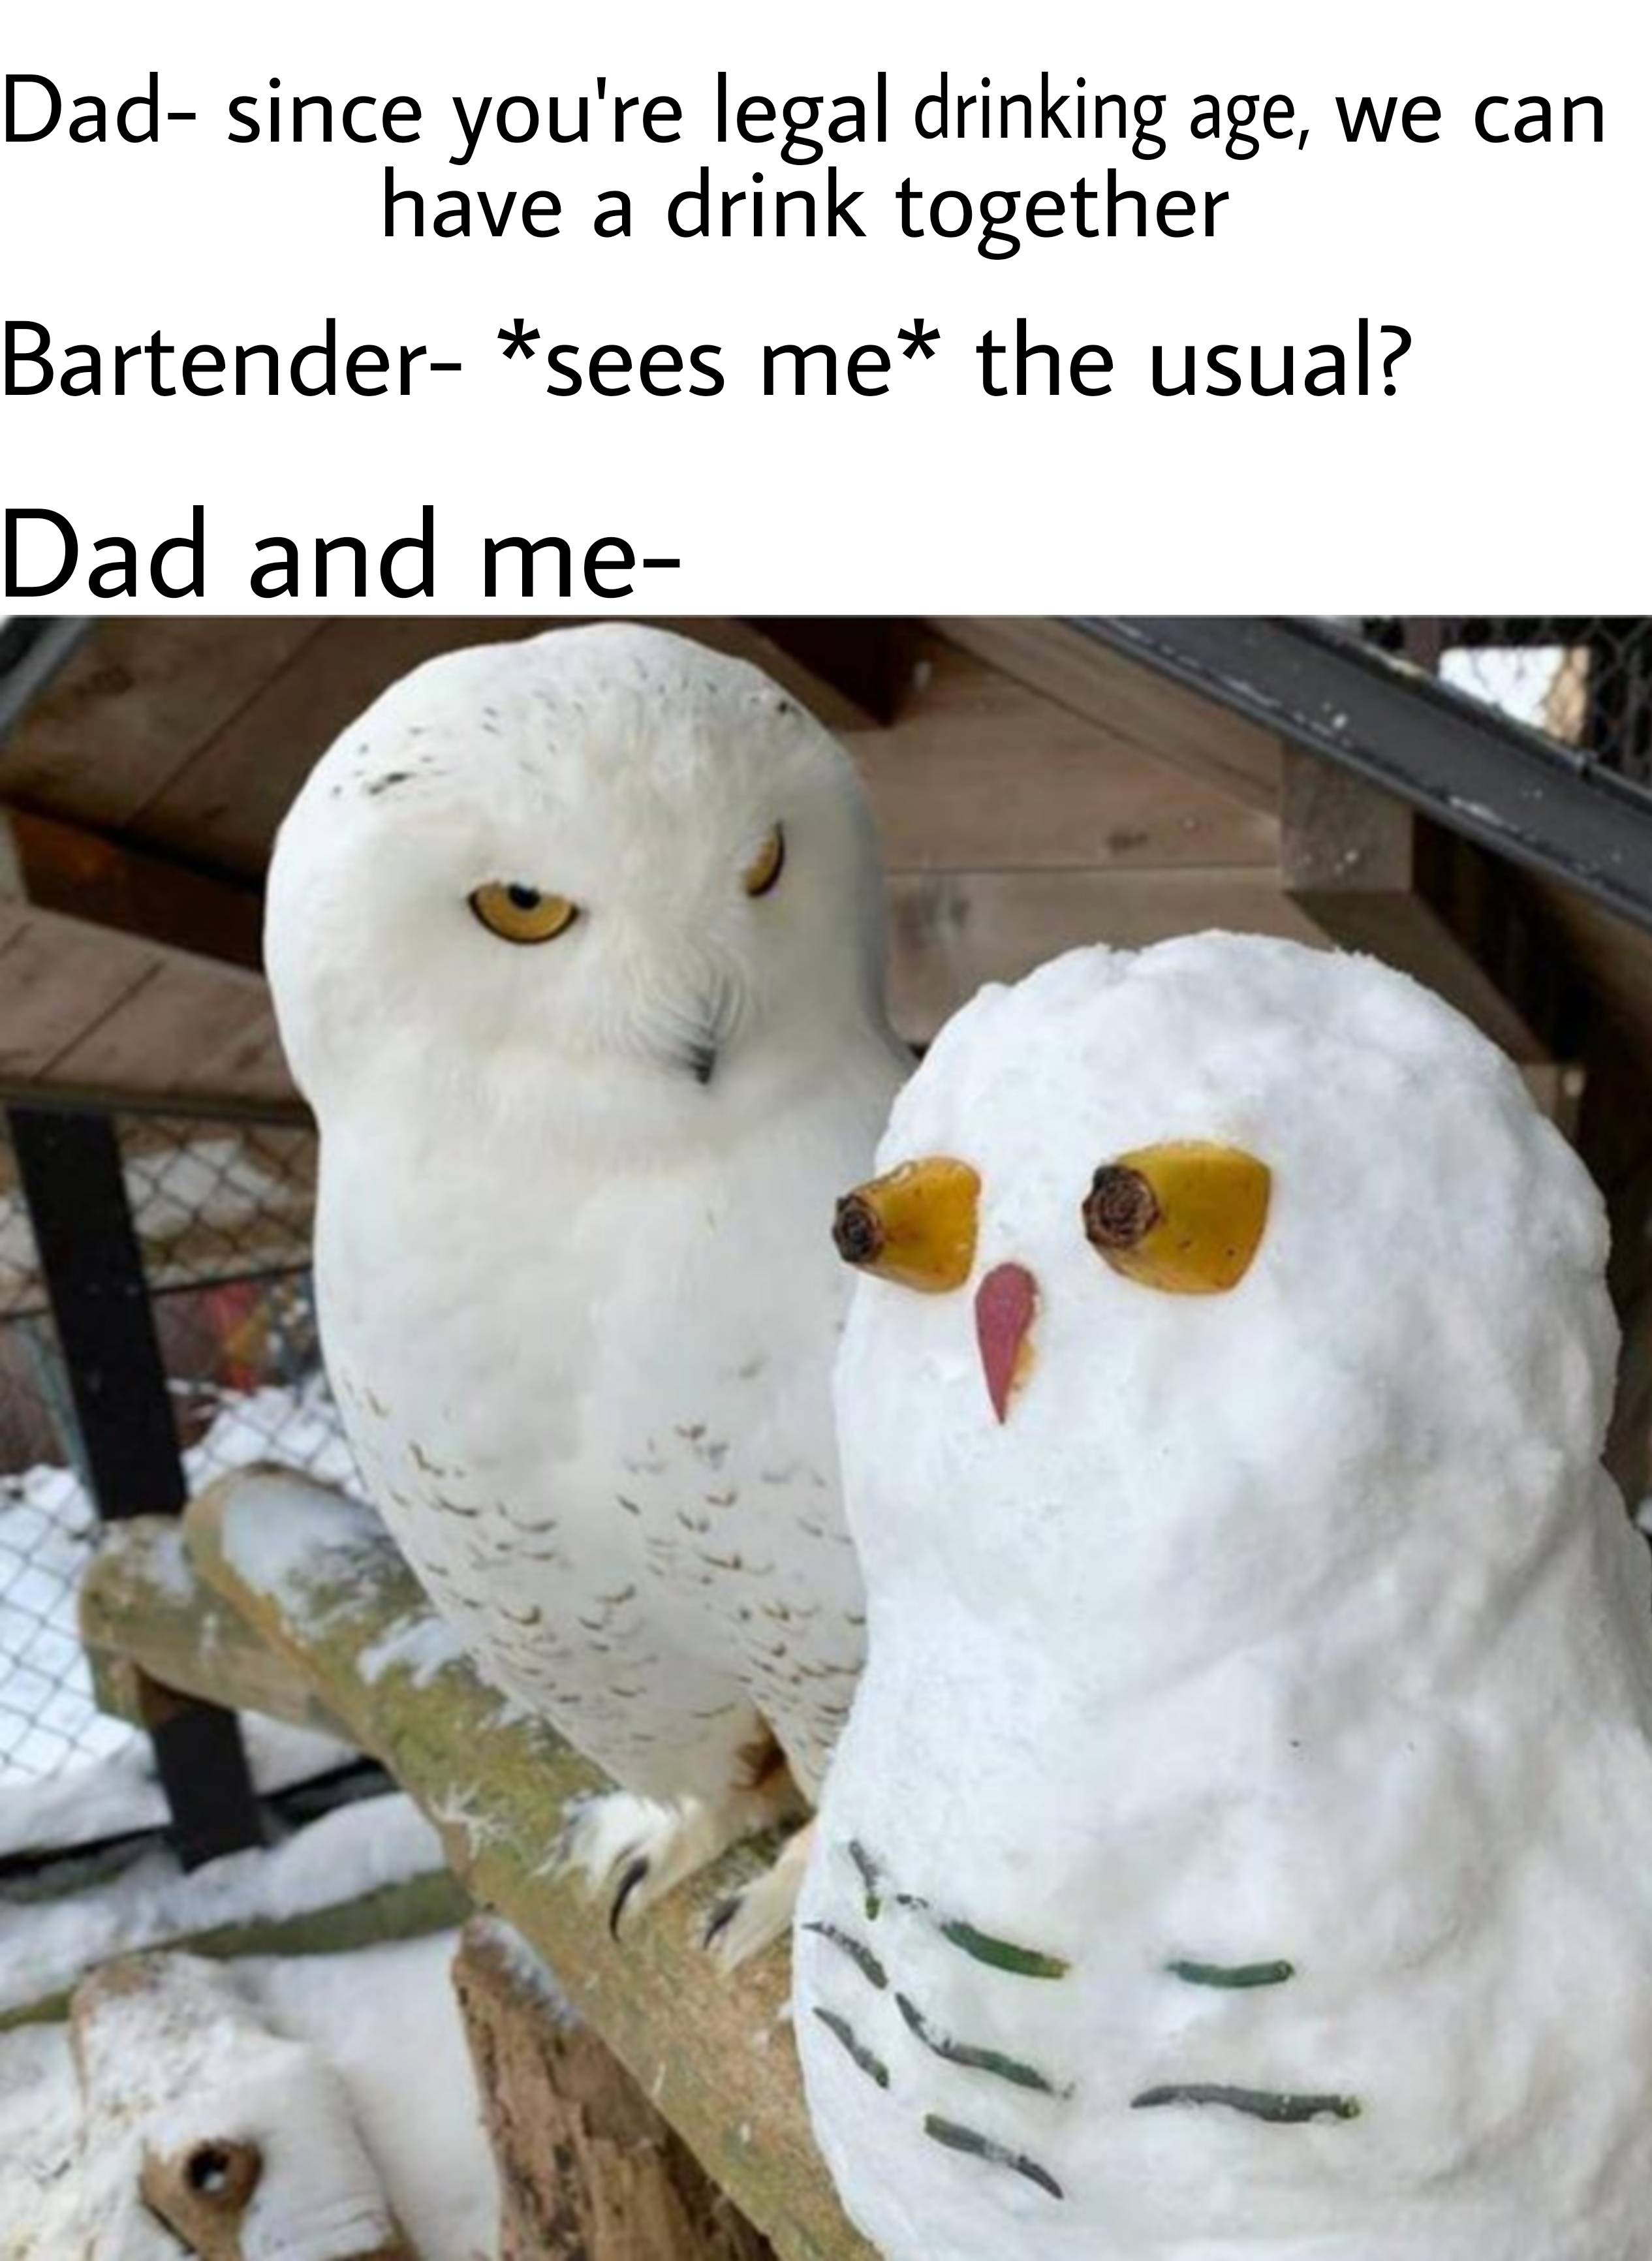 dank memes, funny memes - snowy owl funny - Dad since you're legal drinking age, we can have a drink together Bartender sees me the usual? Dad and me